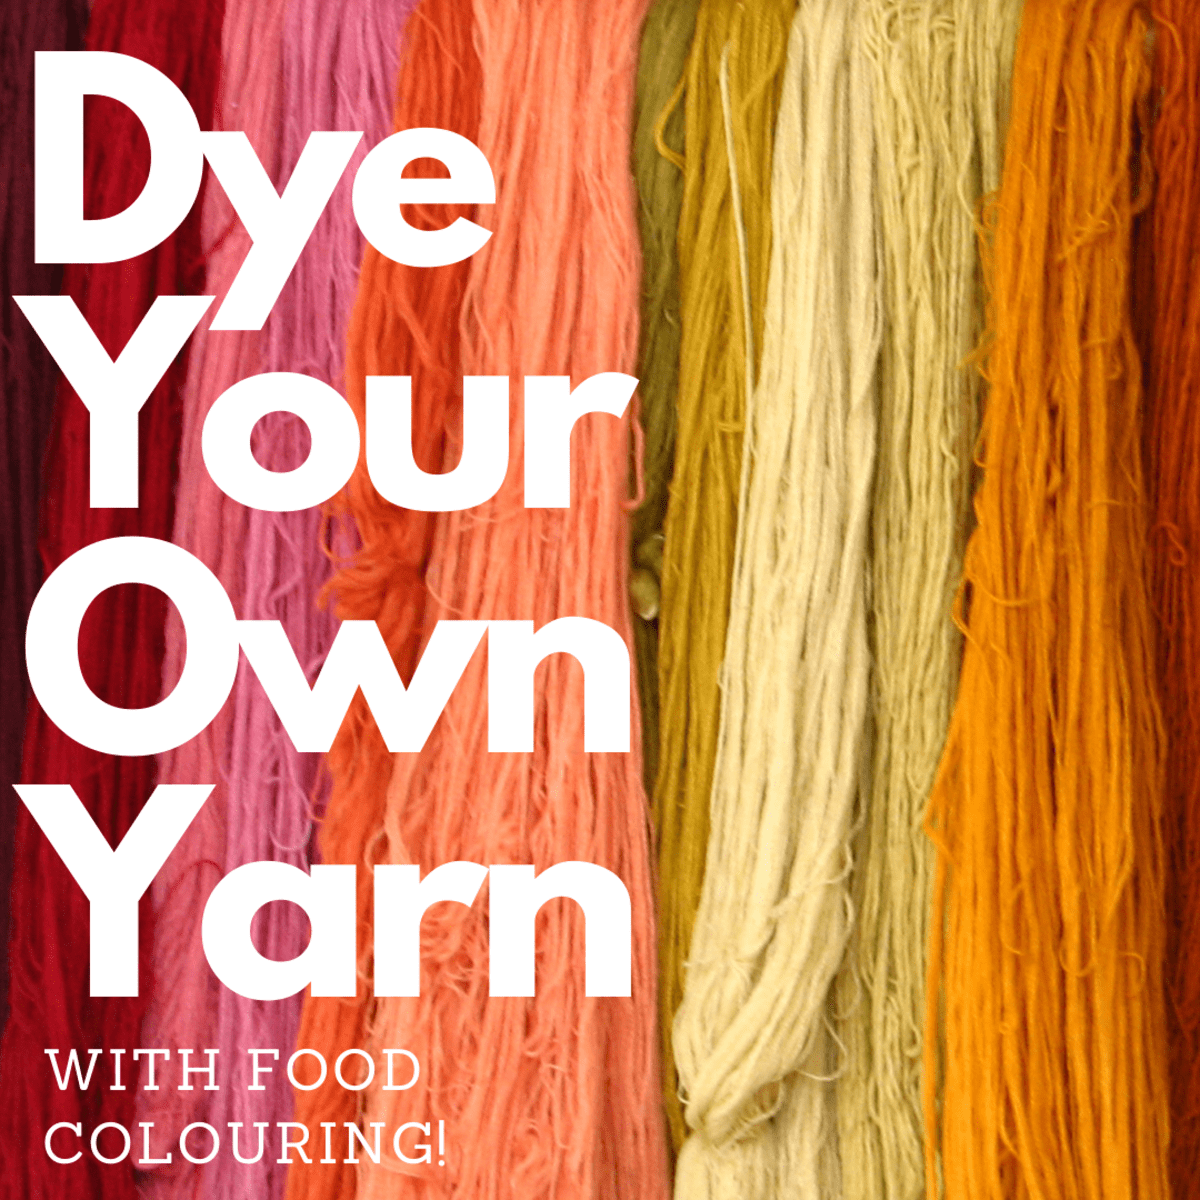 How to Dye Yarn with Food Coloring (Video and Best Tips!) - Sheep and Stitch